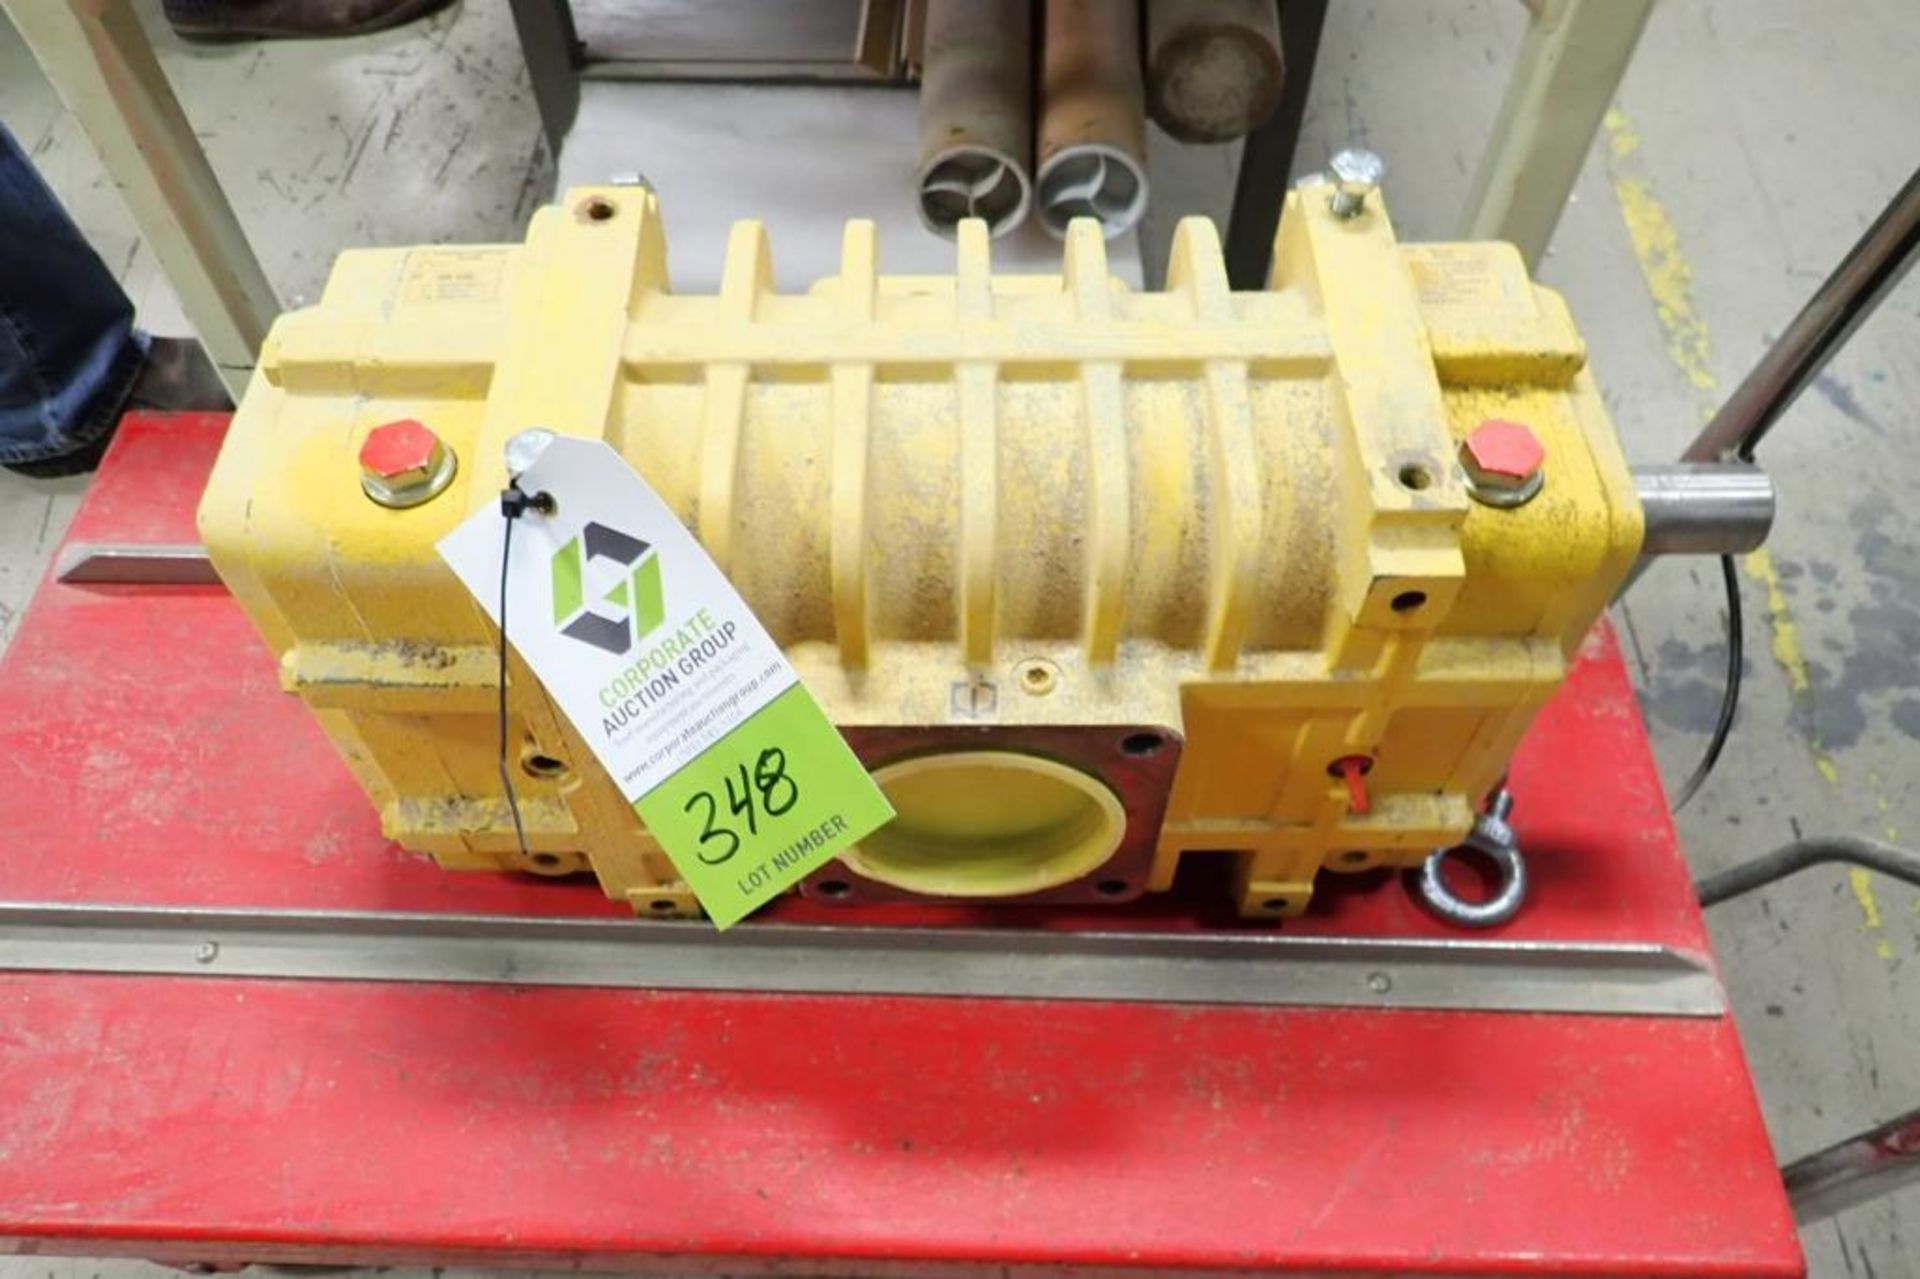 2012 Kaeser omega 43 plus spare blower. **Rigging Fee: $25** (Located in Brooklyn Park, MN.)